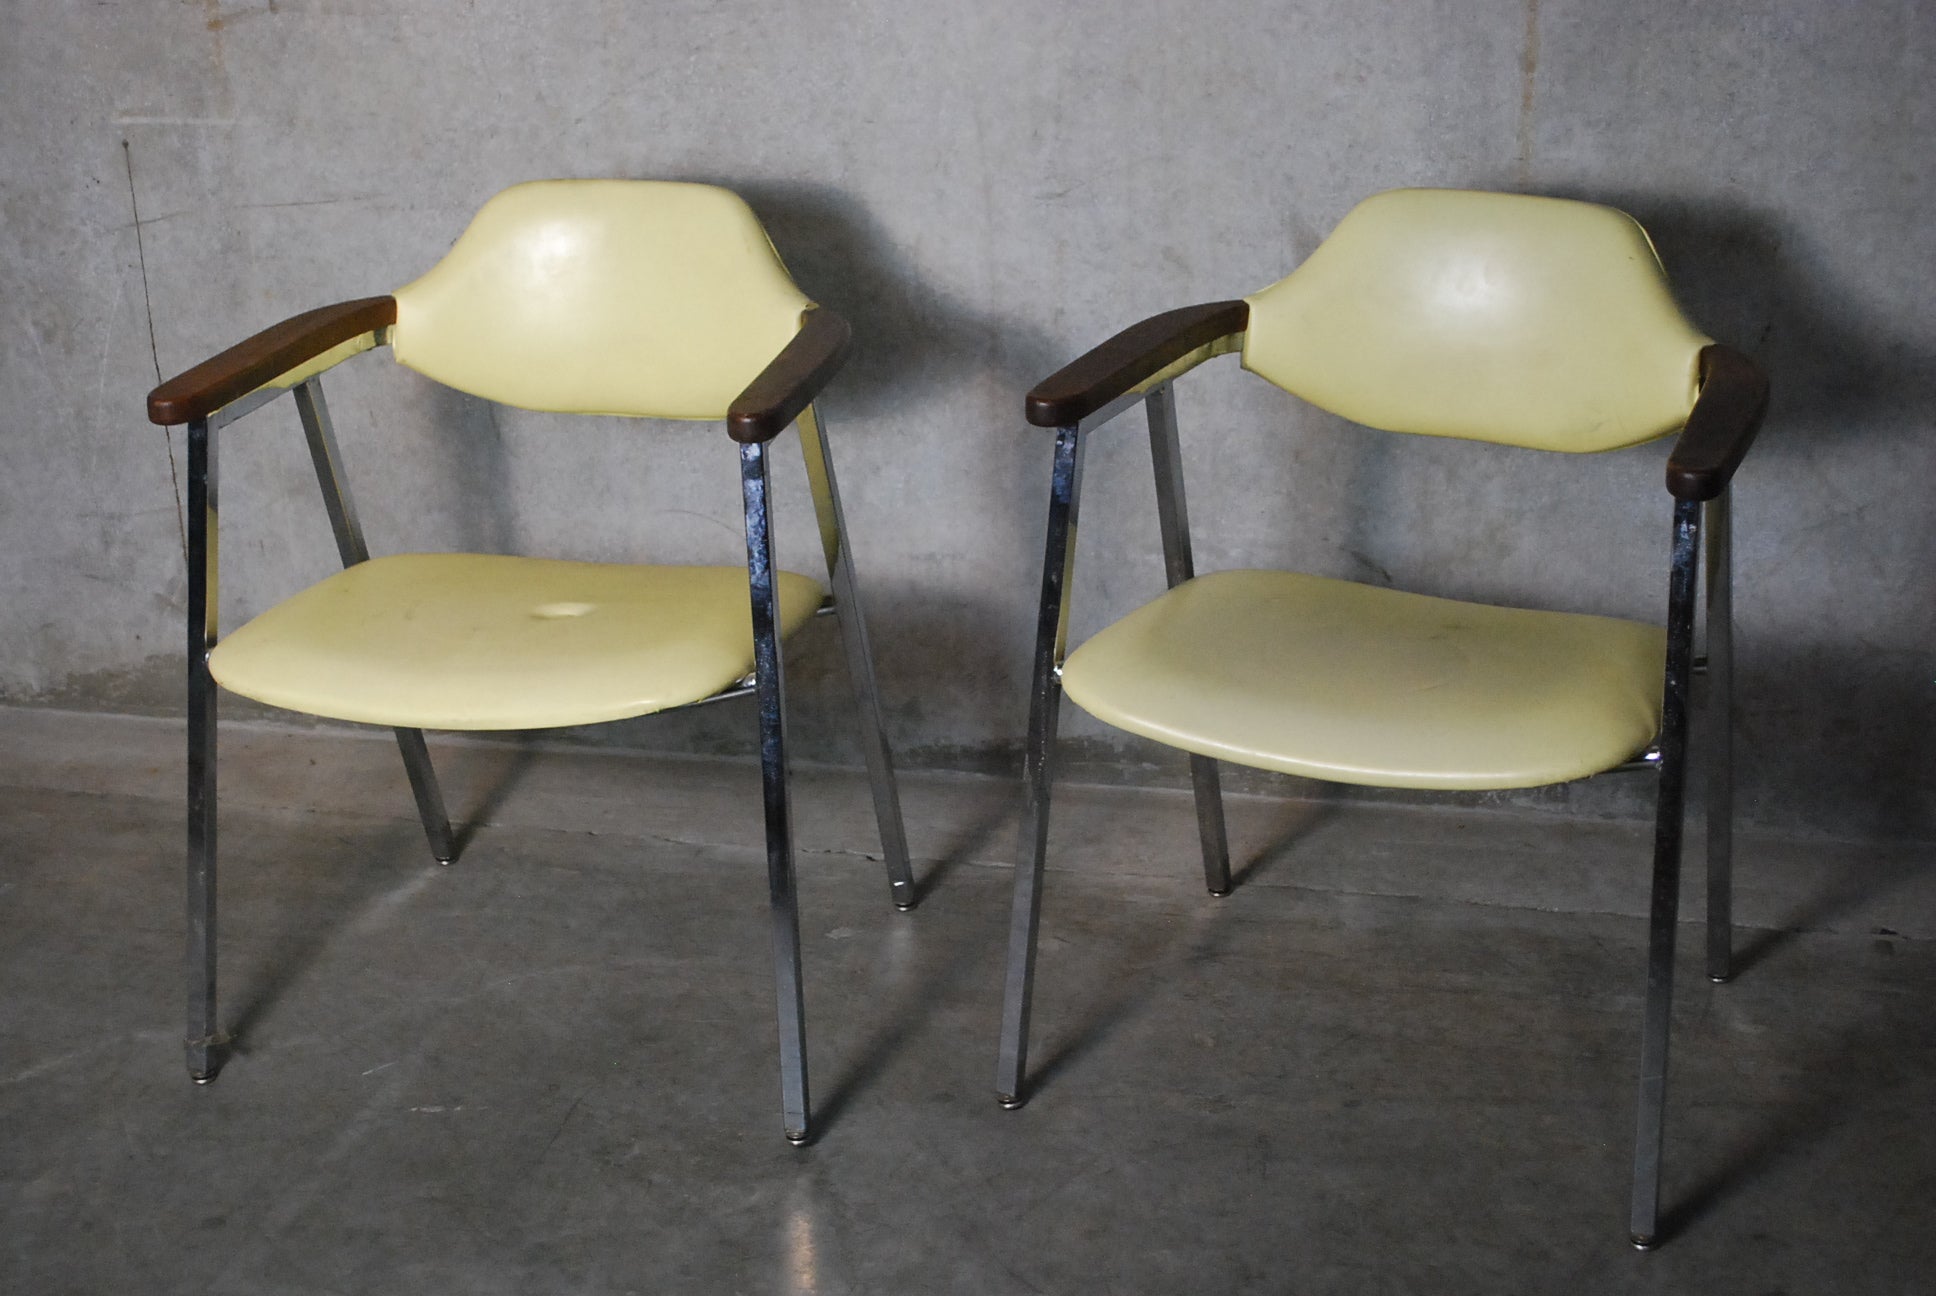 1960's MCM Royal Metal Co Chairs | Scott Landon Antiques and Interiors.